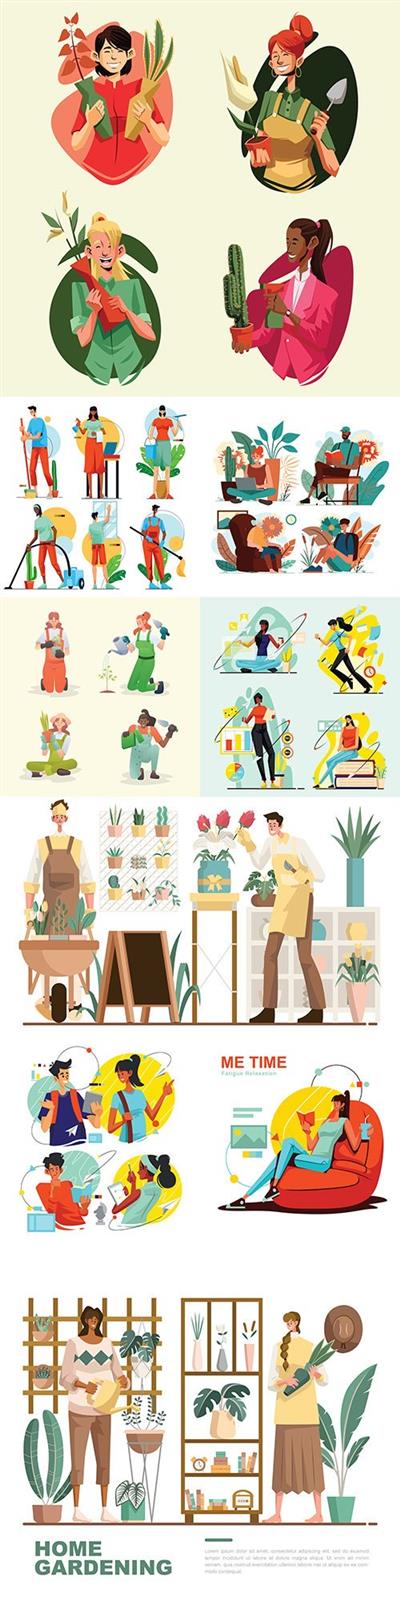 People lifestyle and work illustration collection